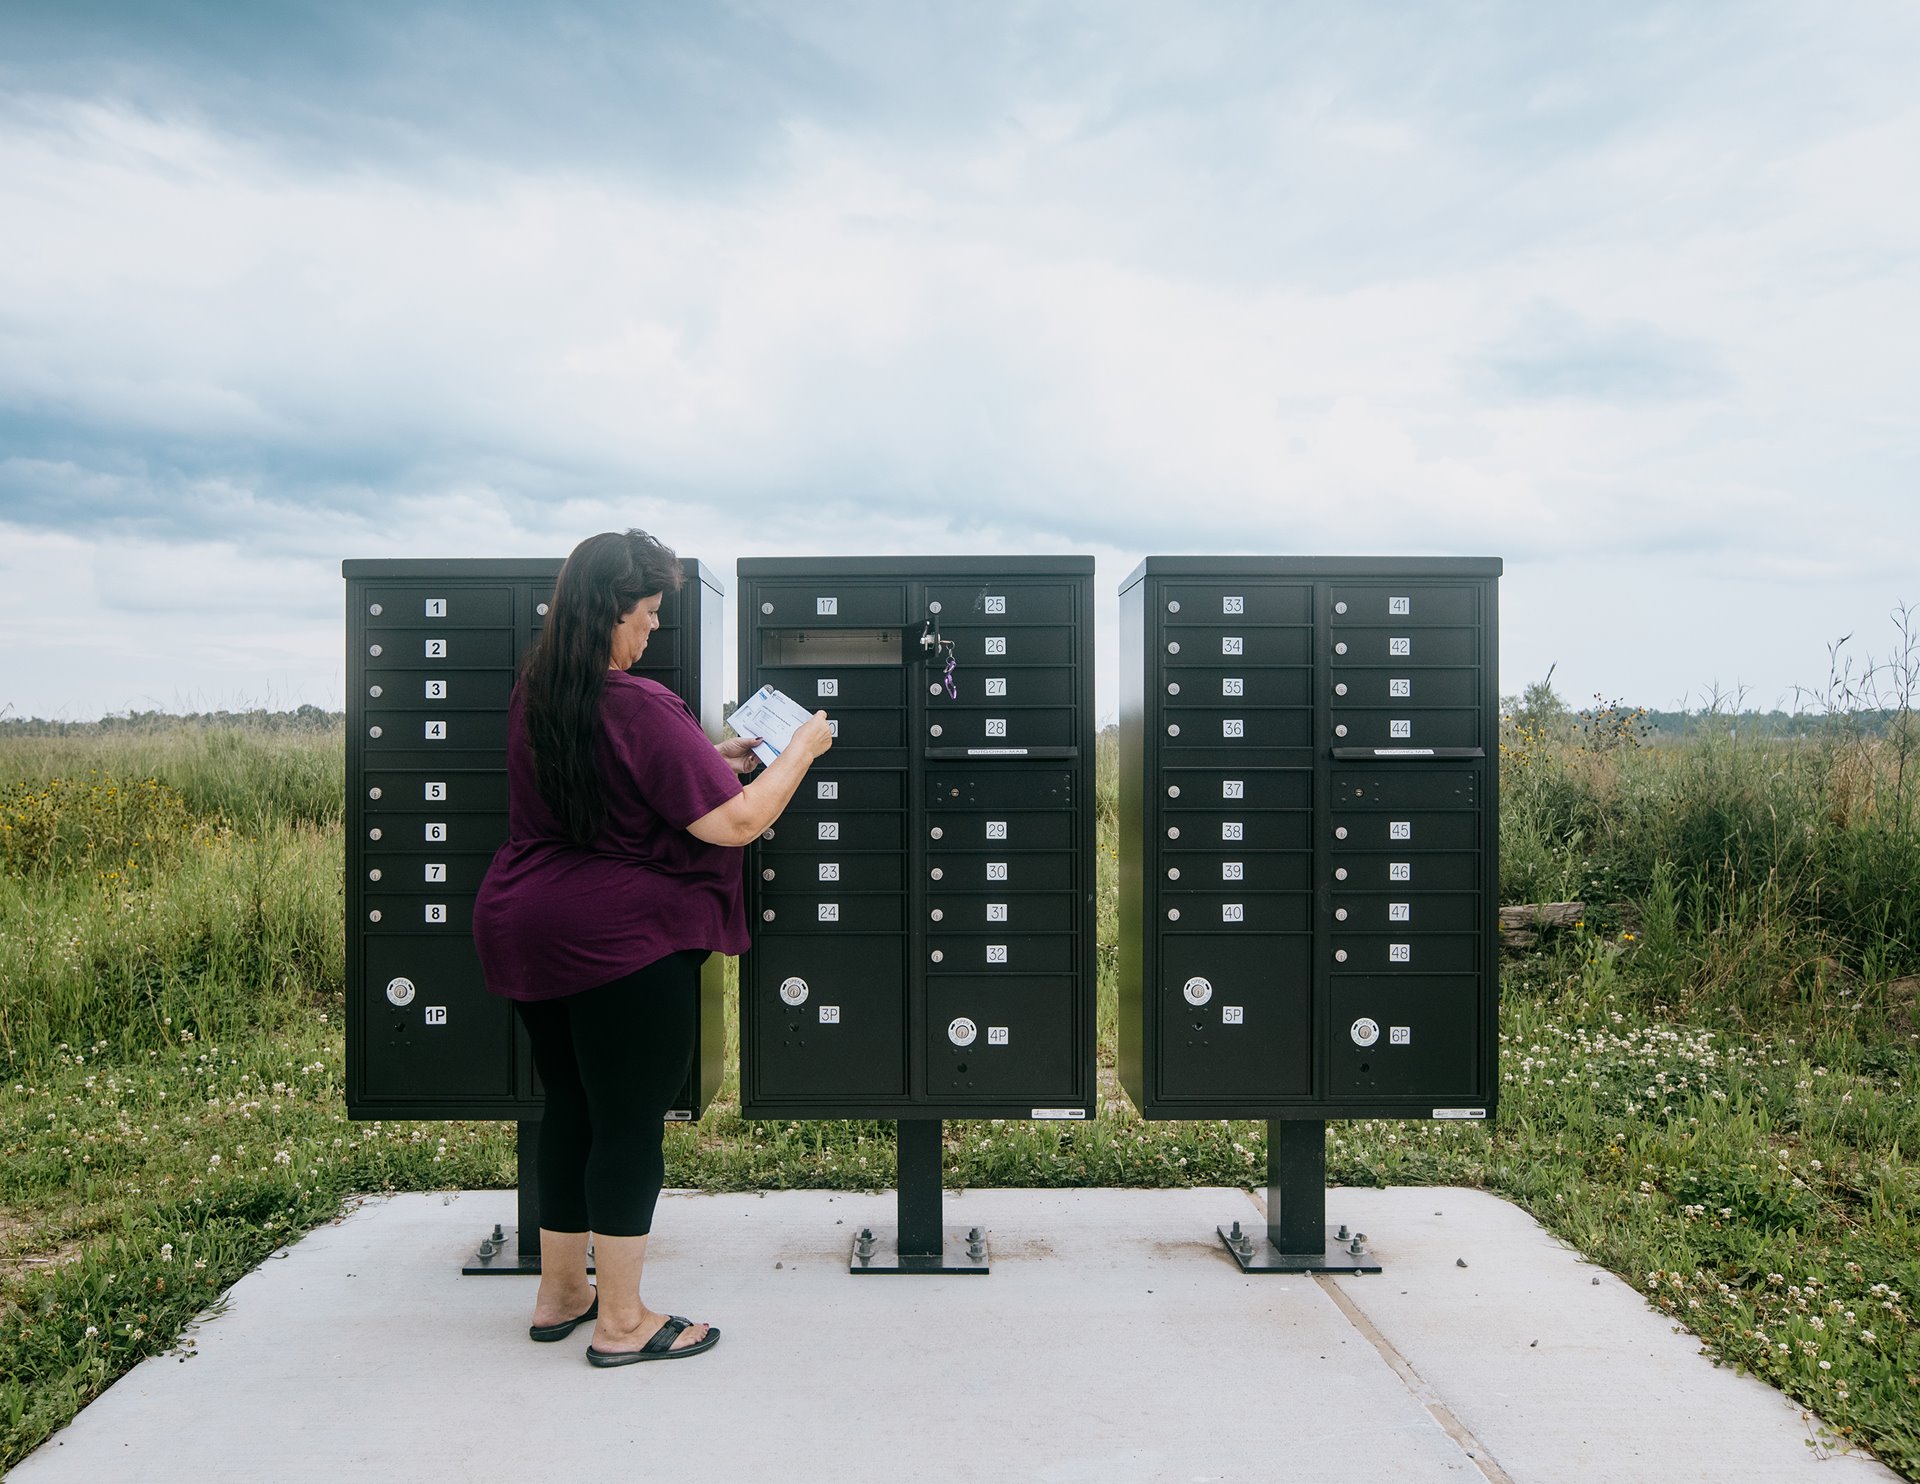 Sabrina Verdin, a native and former resident of Isle de Jean-Charles, picks up her mail in the new neighborhood of Gray where she now lives with her husband. Gray, Louisiana, United States.